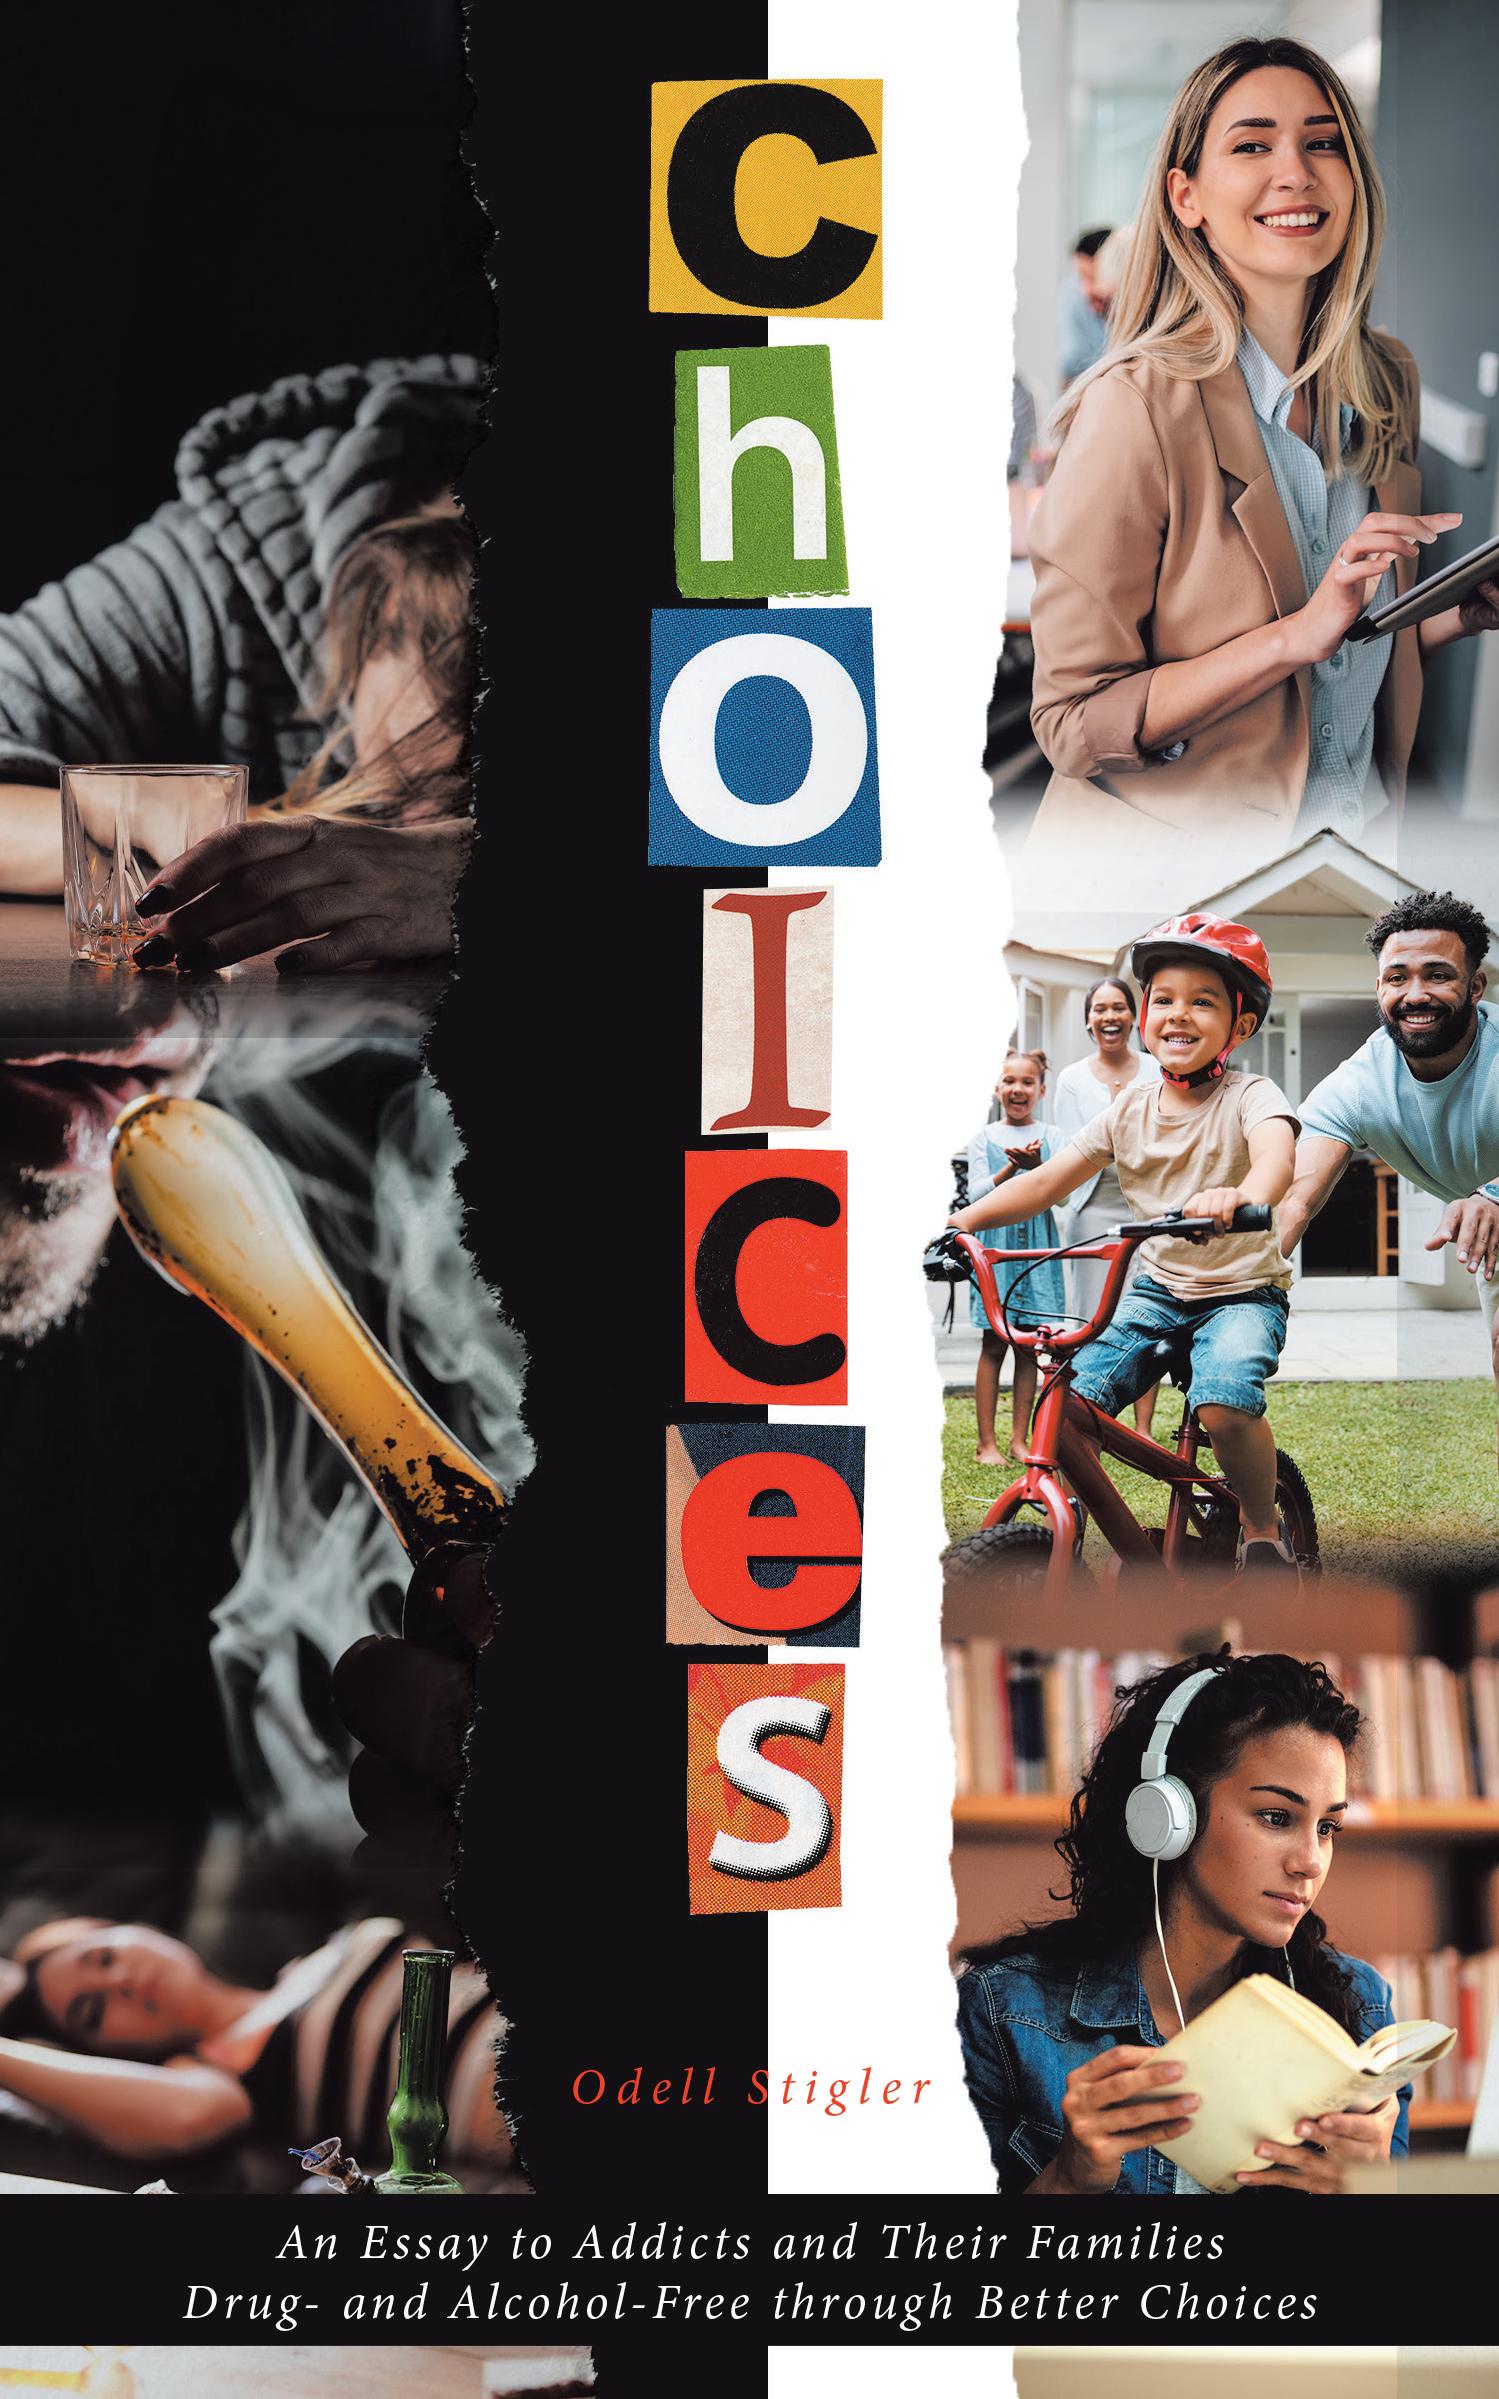 Odell Stigler’s New Book, “Choices: An Essay to Addicts and Their Families Drug- and Alcohol-Free through Better Choices,” Explores How the Author Overcame His Addictions